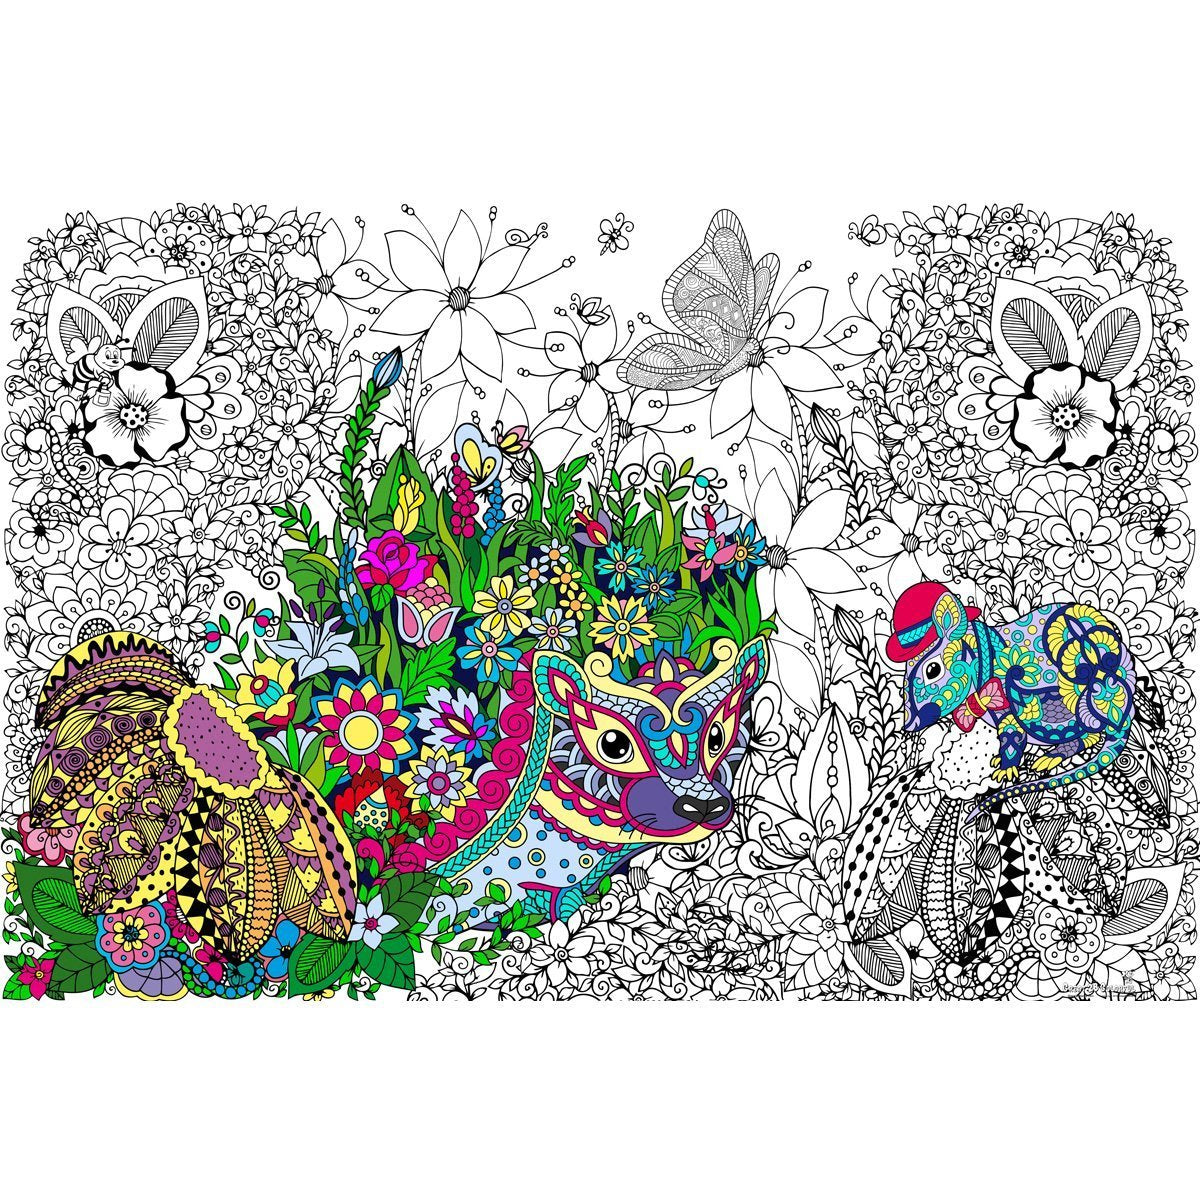 Great2bColorful - Henrietta Hedgehog Coloring Poster